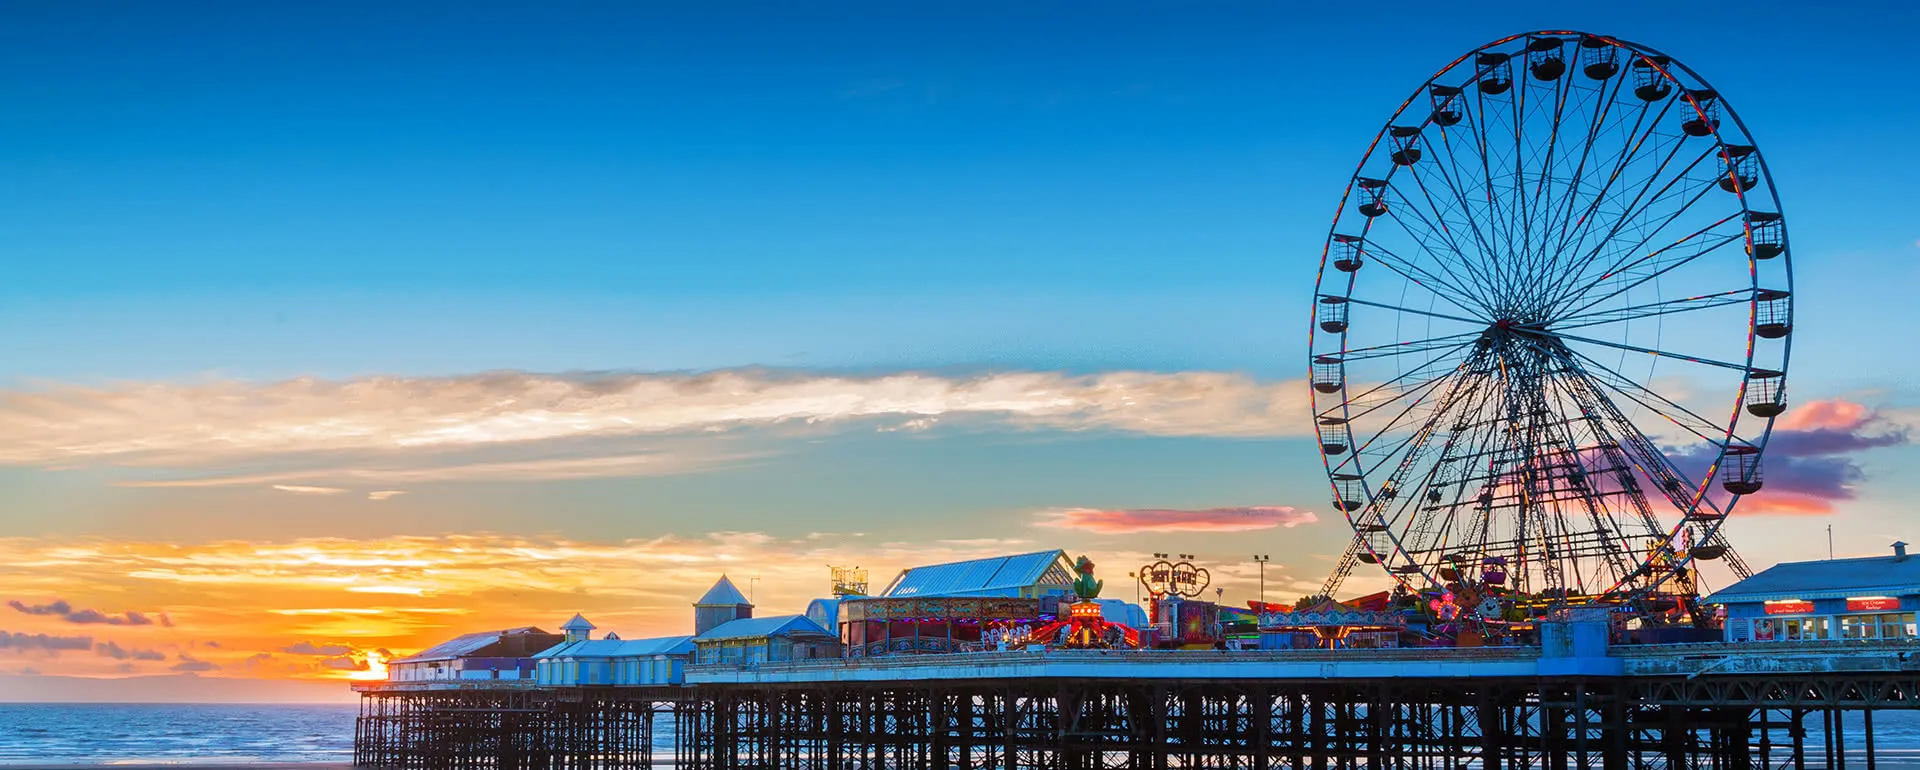 Blackpool - the destination with youth hostels